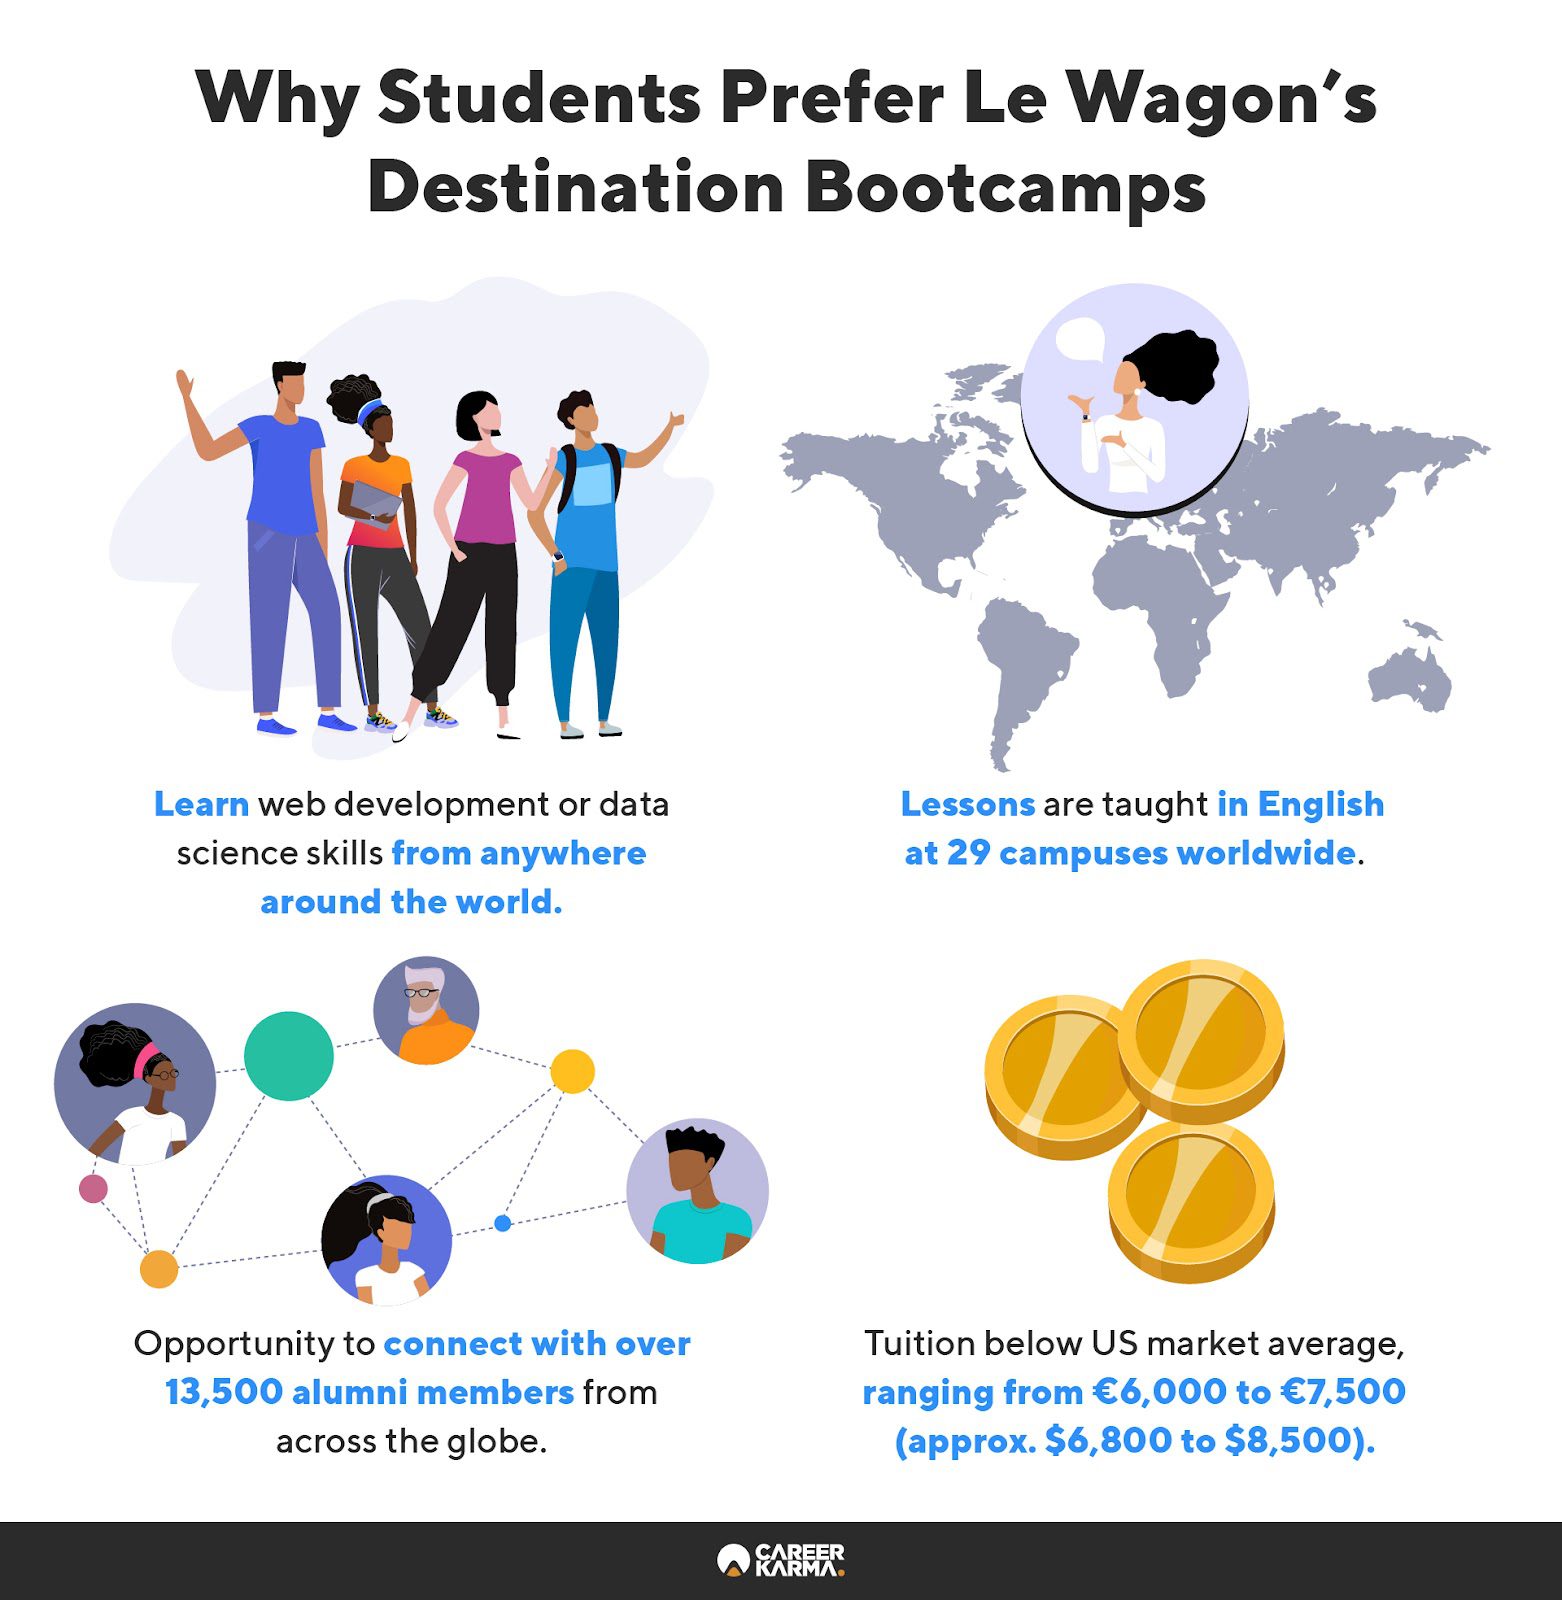 An infographic outlining the benefits of enrolling at Le Wagon